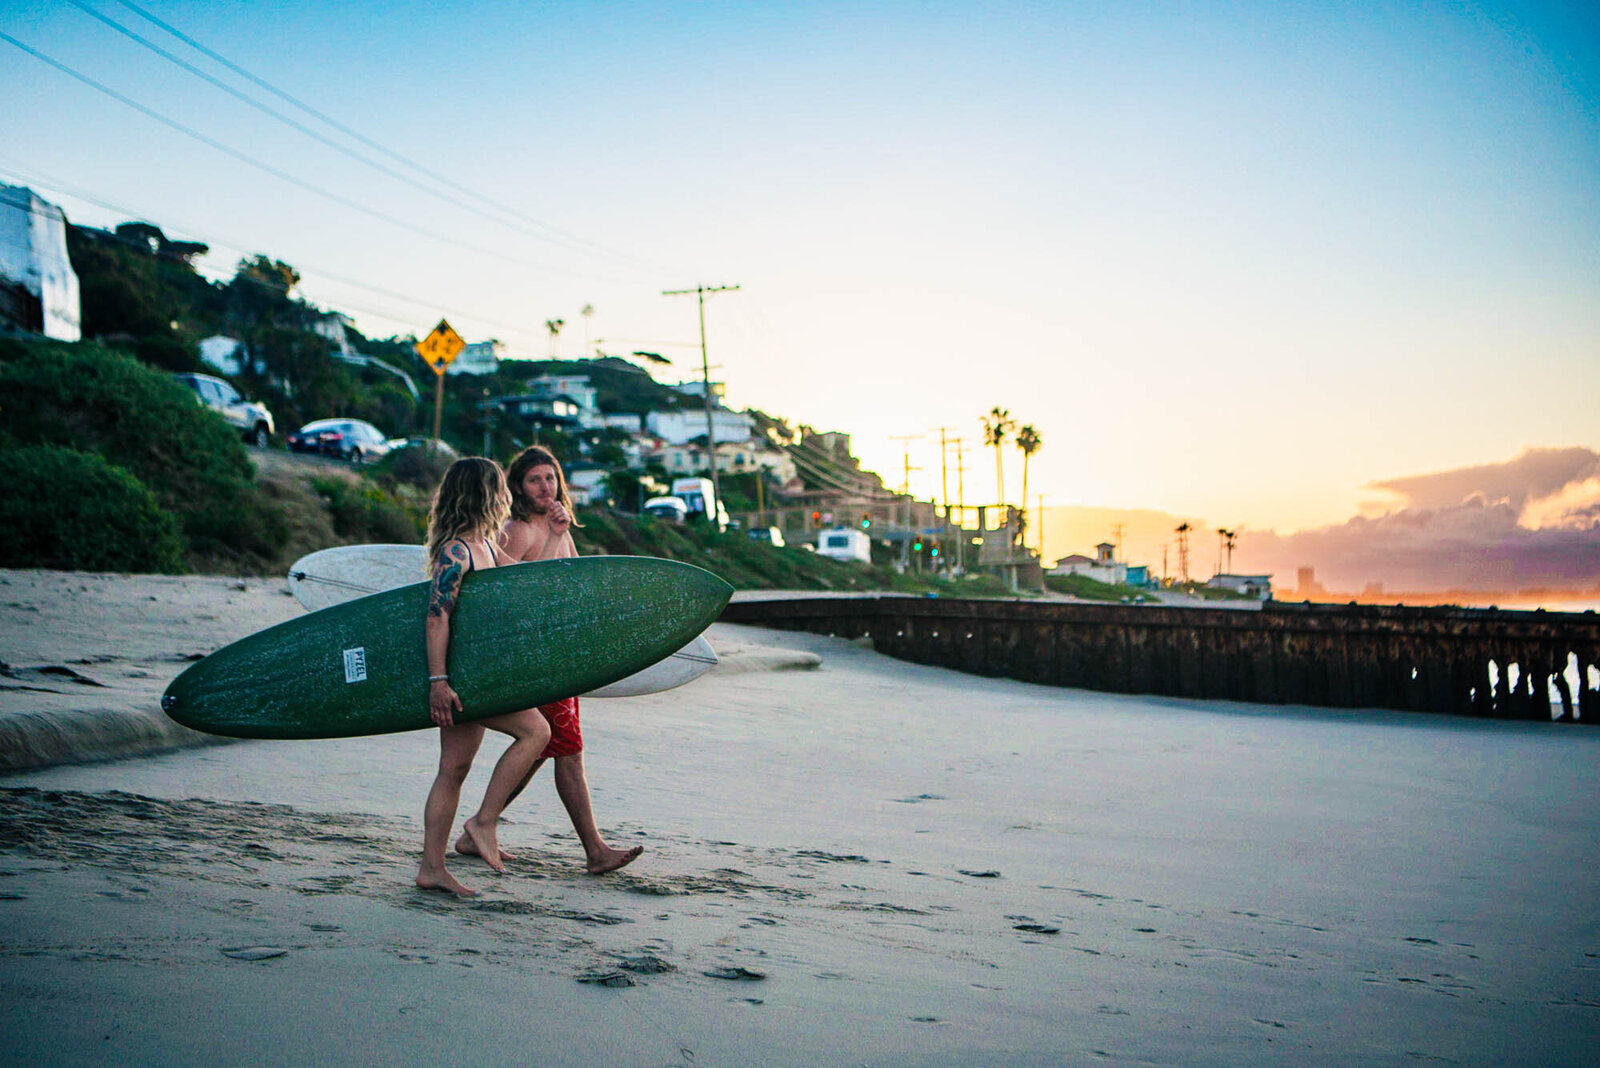 Couple carrying surfboards walks on Los Angeles beach